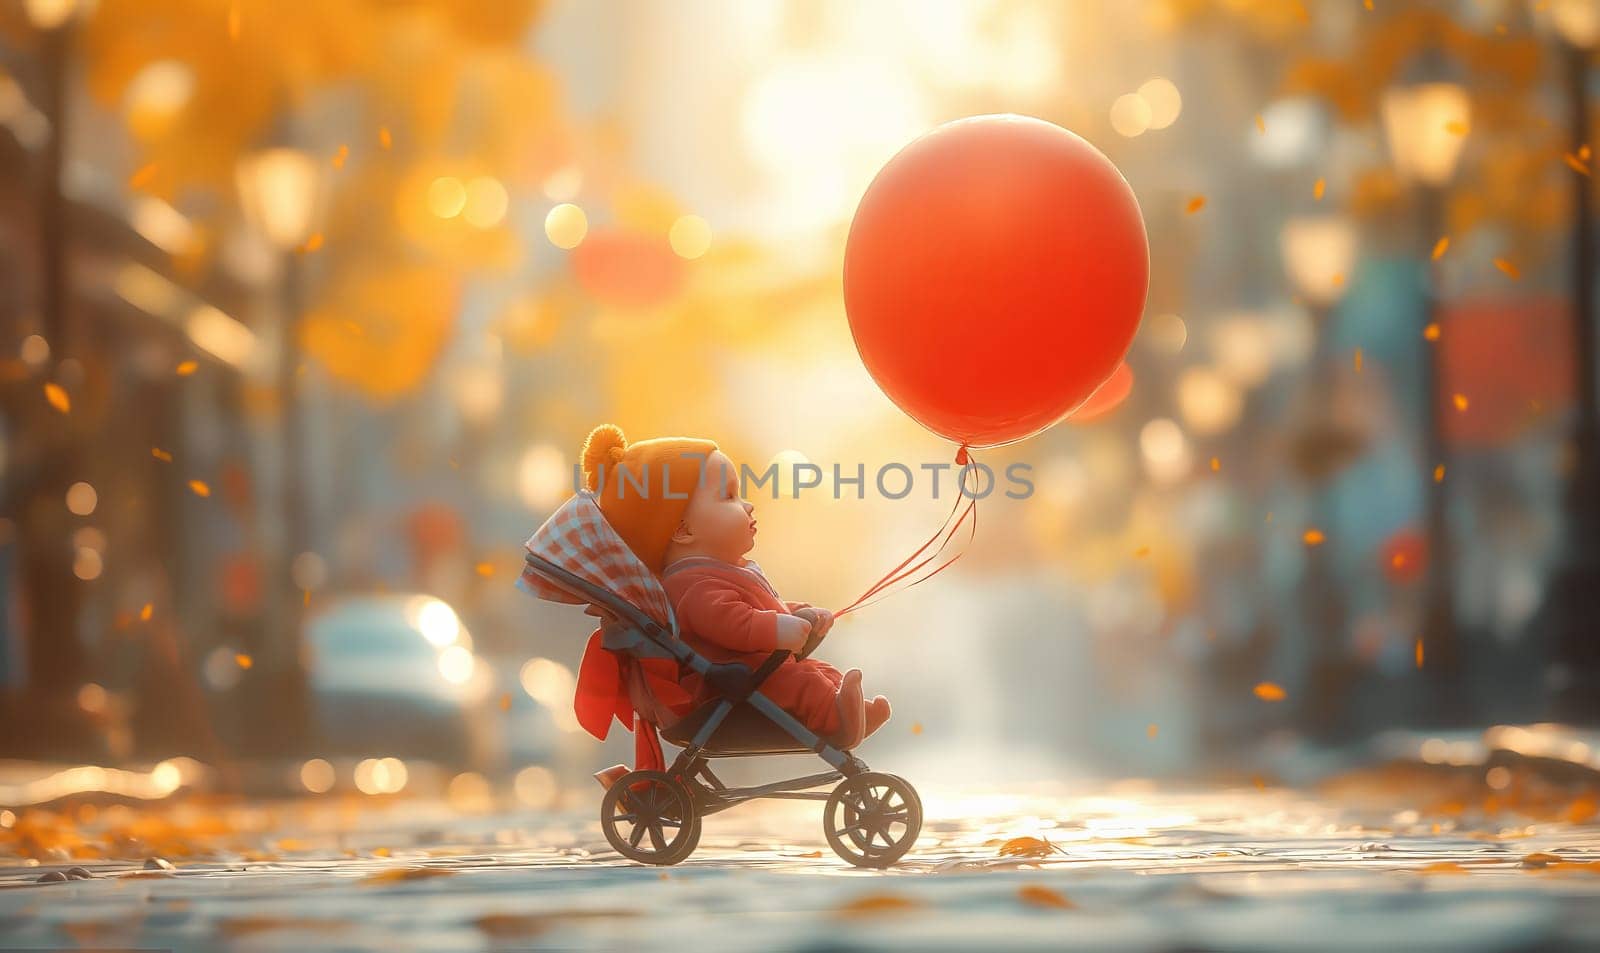 Illustration of a child sitting in a stroller in nature. by Fischeron